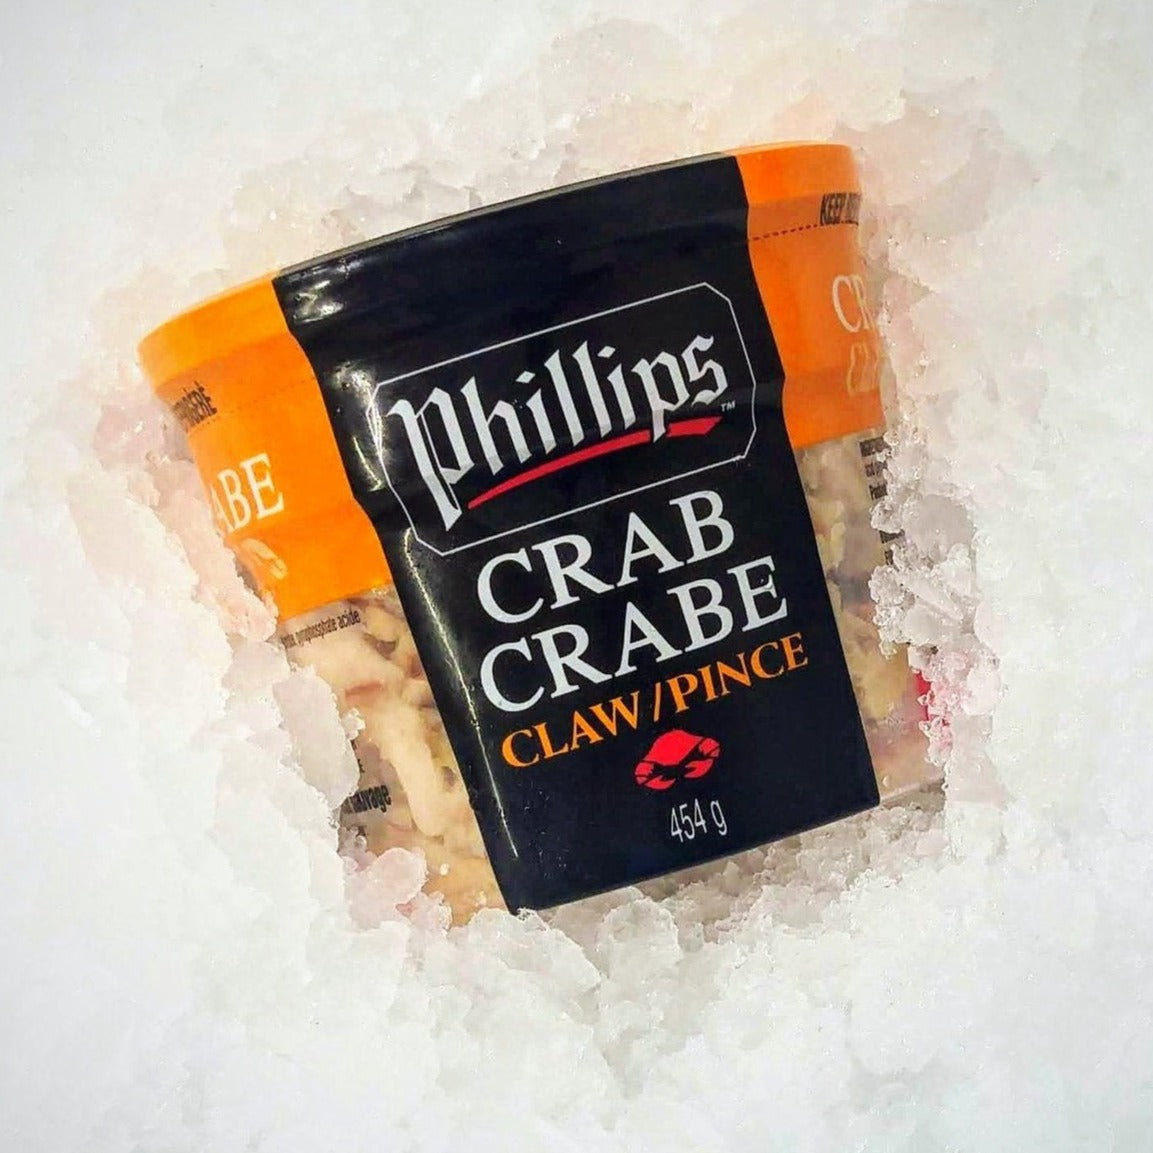 Phillips Crab Claw Meat 454g